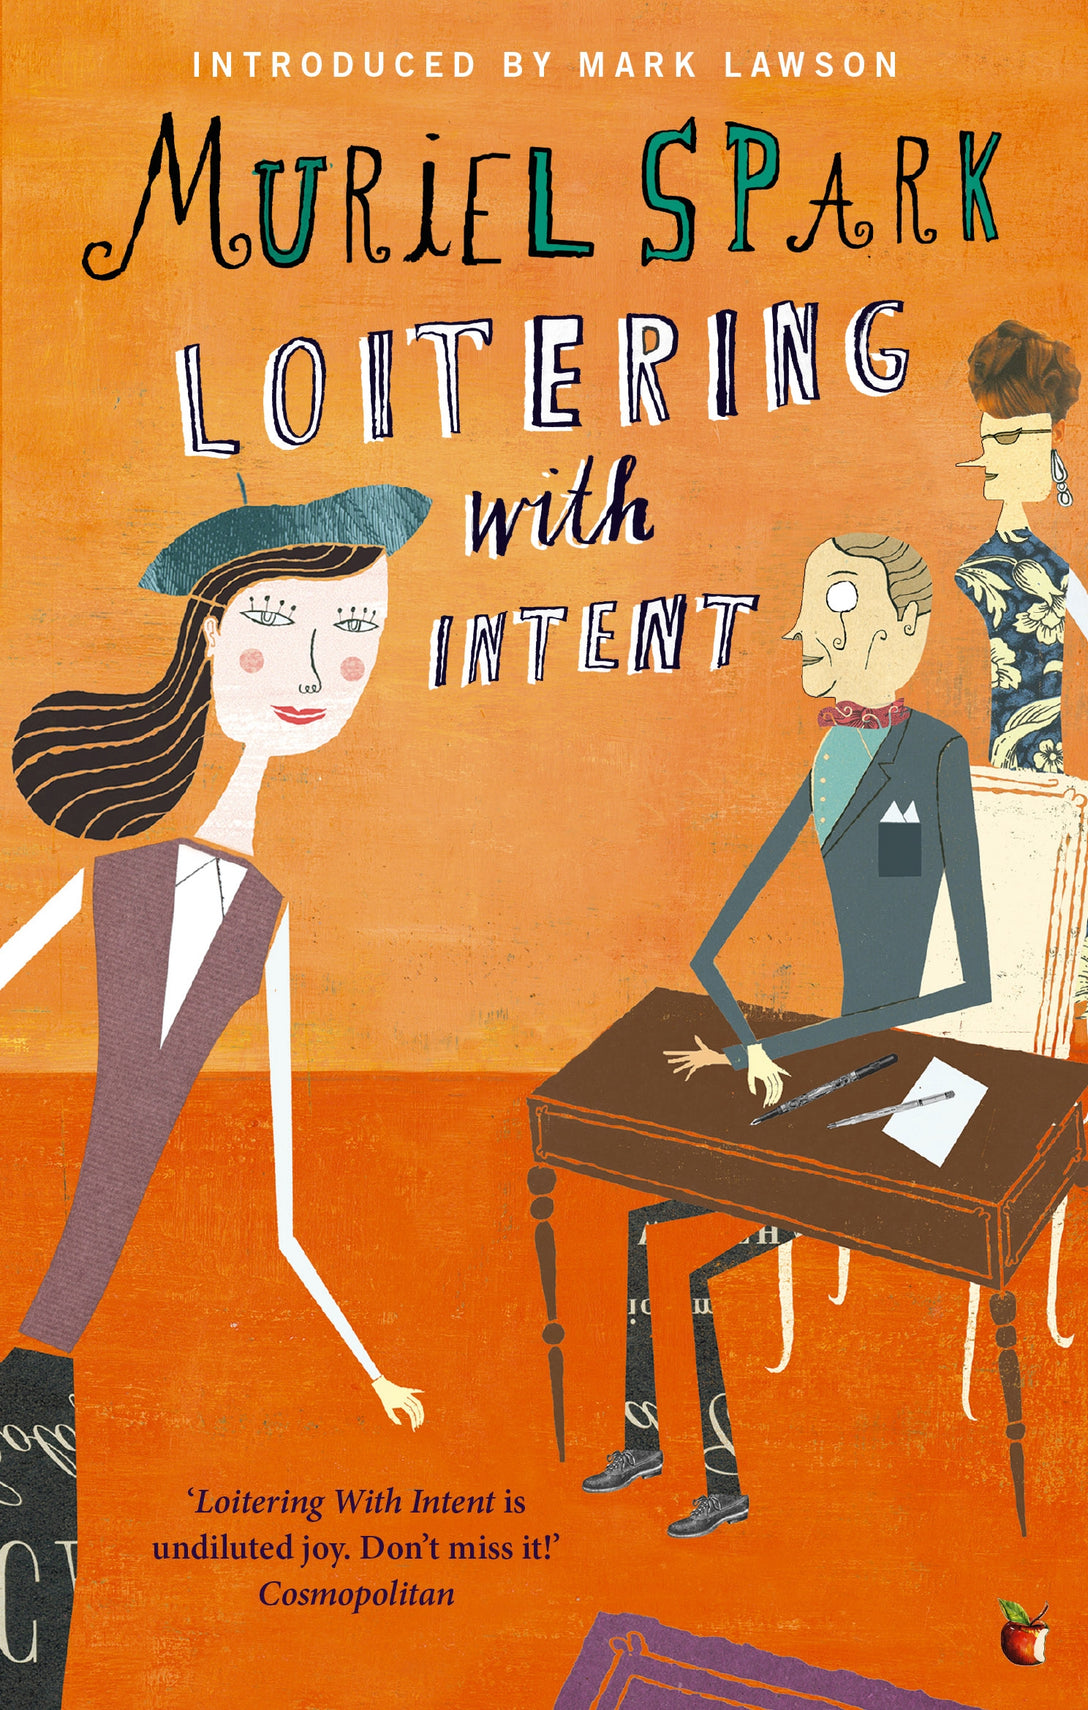 Loitering With Intent by Muriel Spark